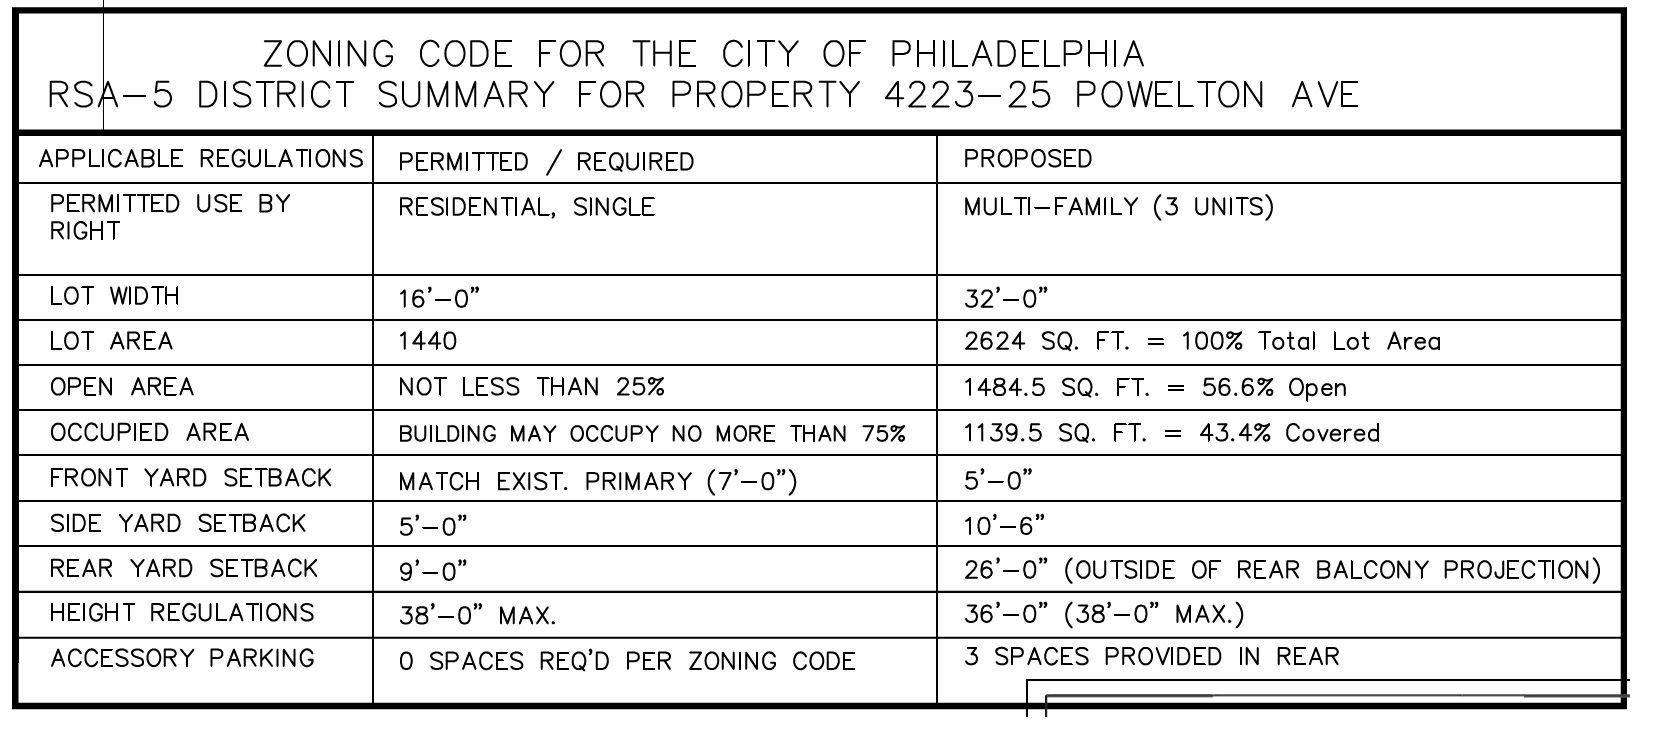 4223 Powelton Avenue. Zoning table. Credit: KCA Design Associates via the Department of Planning and Development of the City of Philadelphia